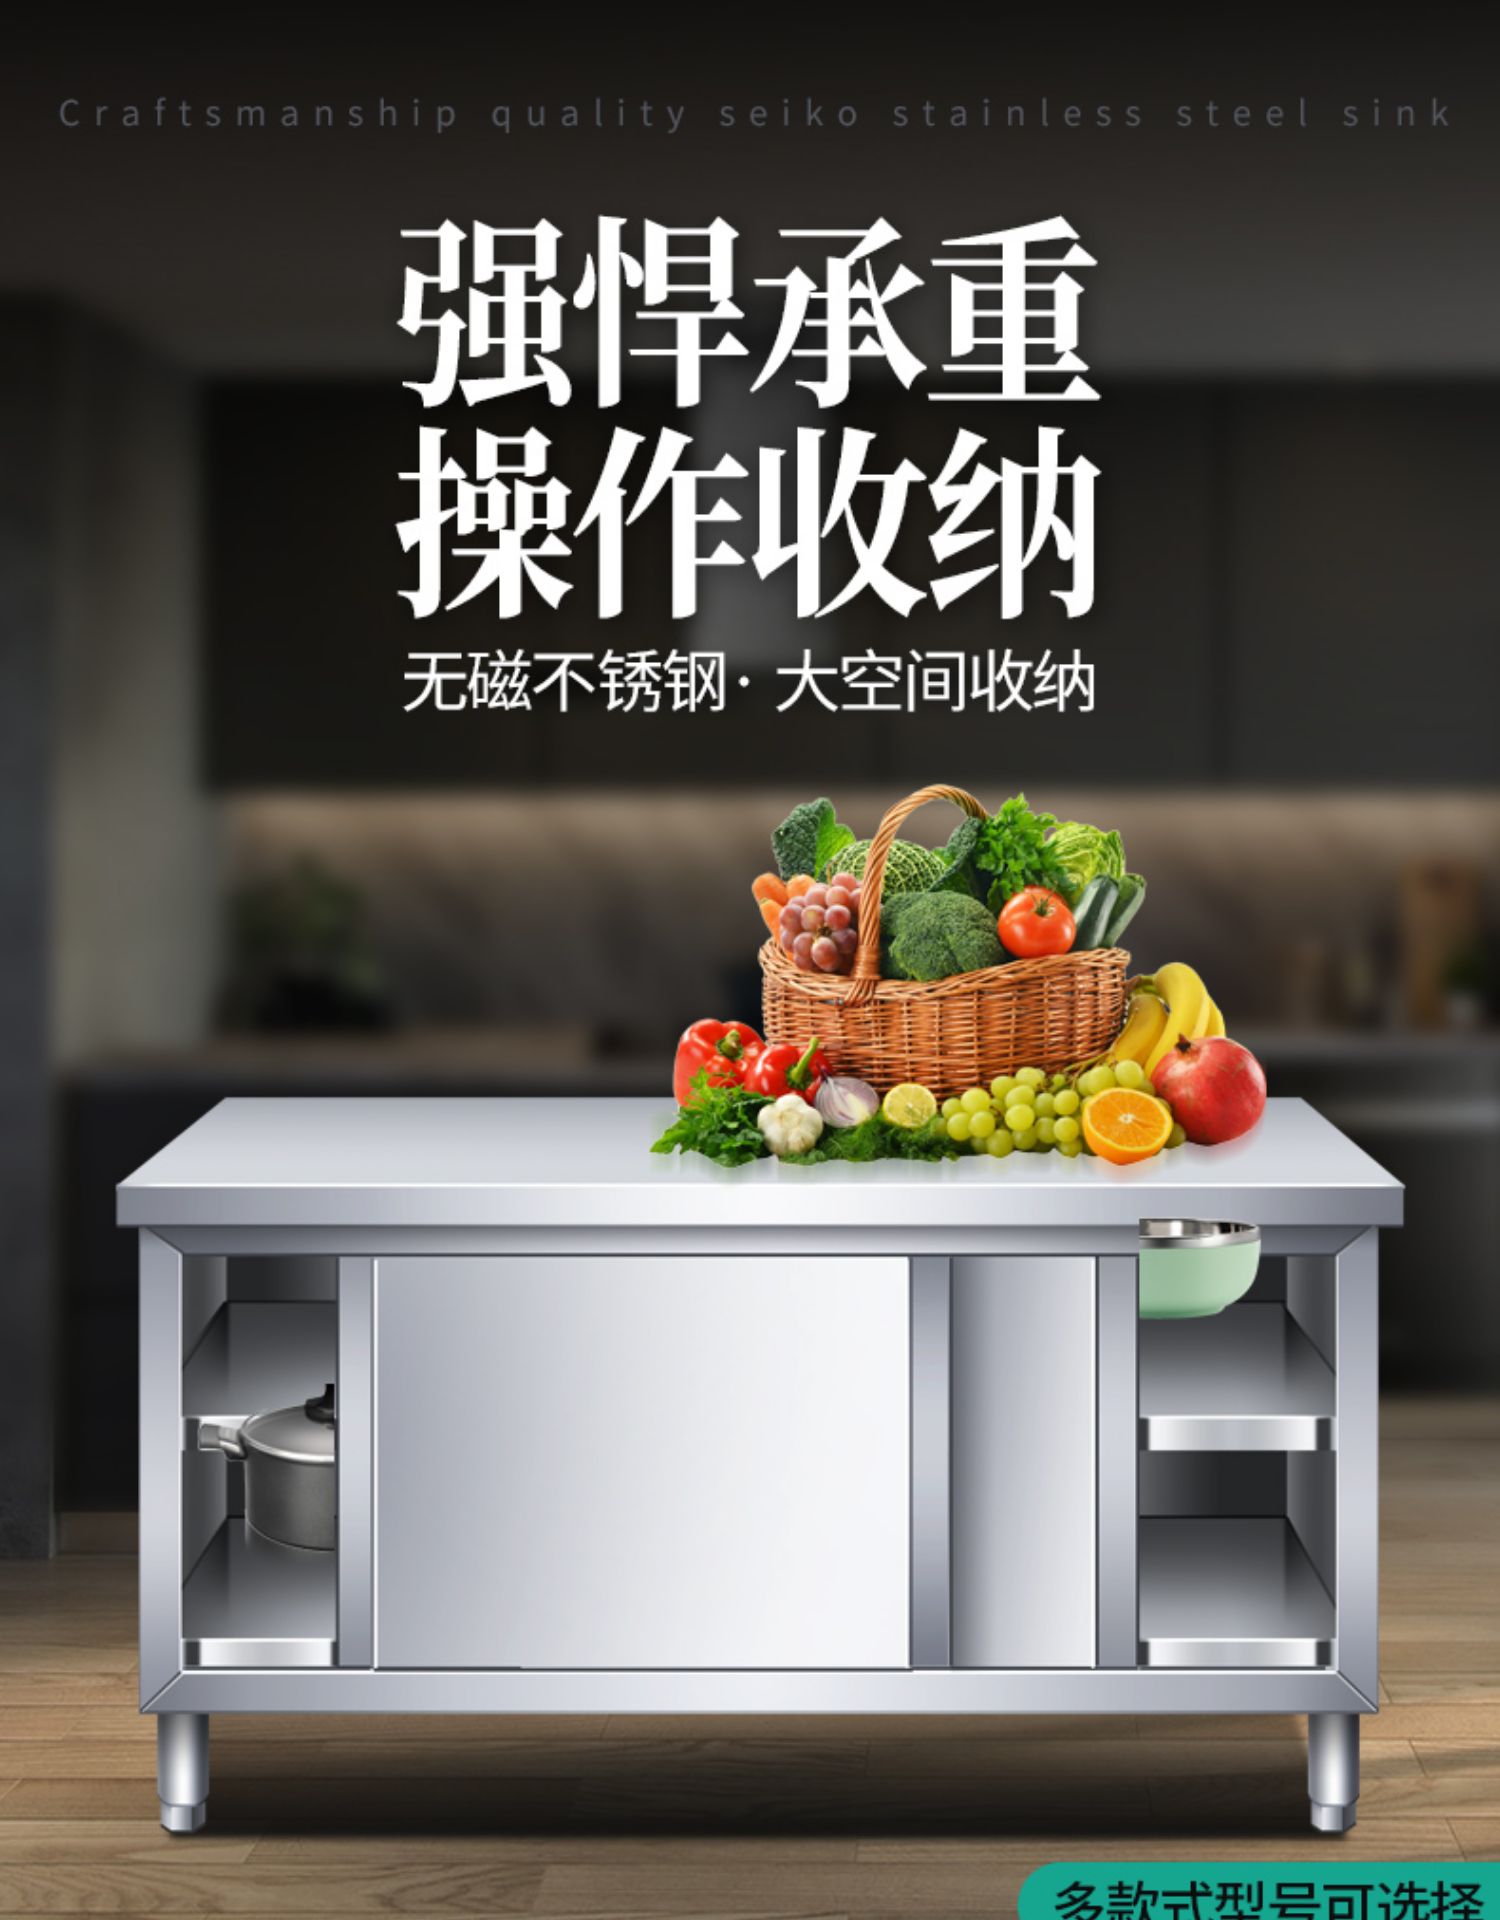 Bowl basket, commercial kitchen, stainless steel workbench, kitchen operation panel, storage cabinet with sliding door, vegetable cutting, packaging, and loading table